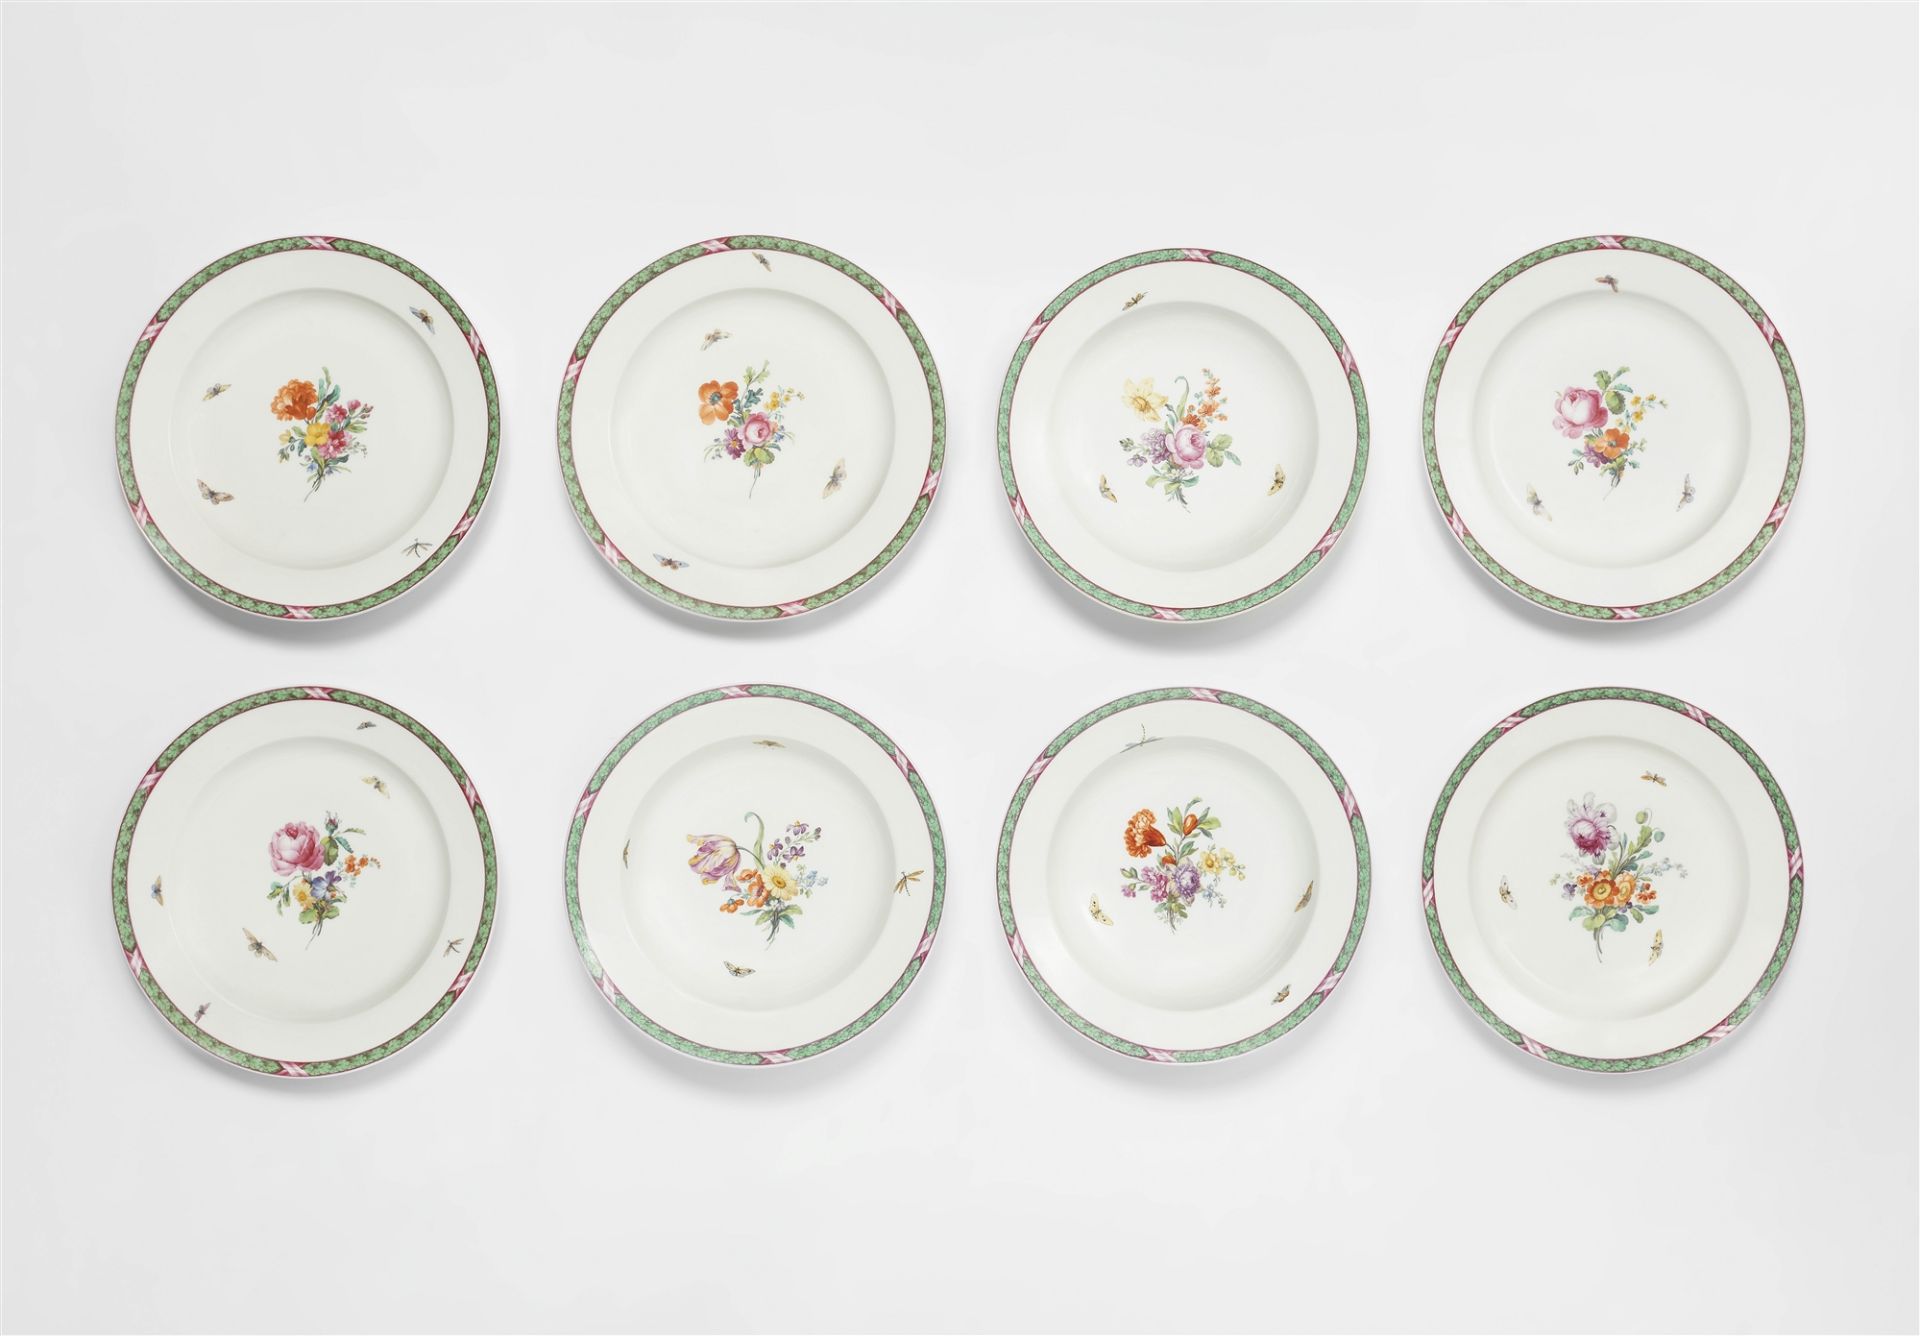 Five Berlin KPM porcelain dinner plates and three soup bowls from a service with oak leaf borders